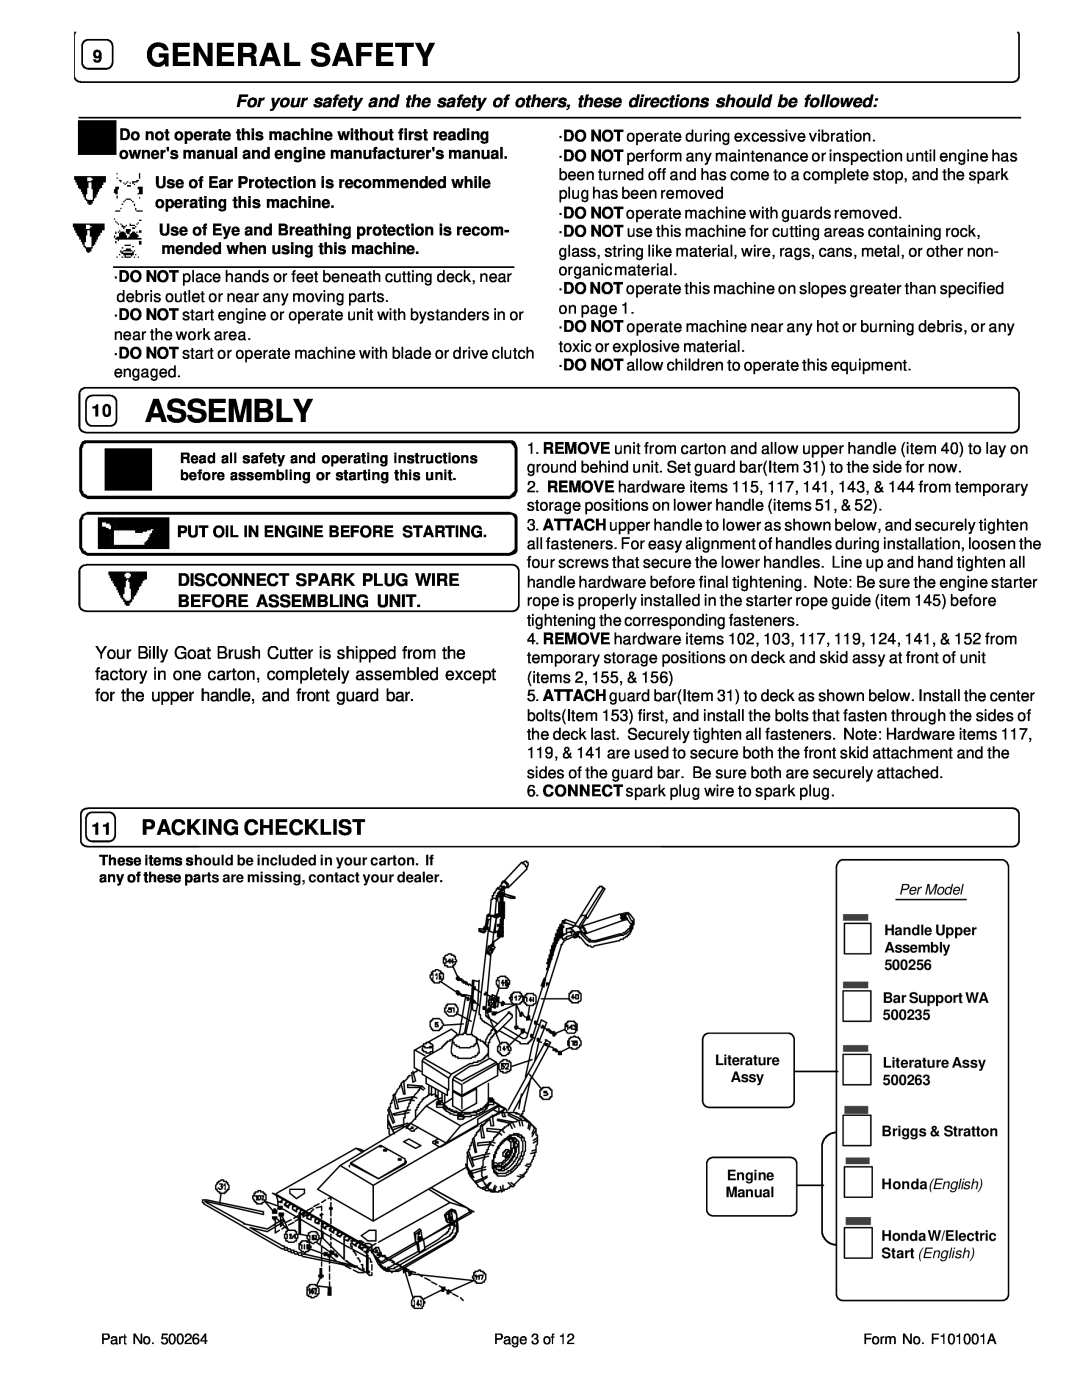 Honda Power Equipment BC2401HE, BC2401IC General Safety, Assembly, Packing Checklist, Put Oil In Engine Before Starting 